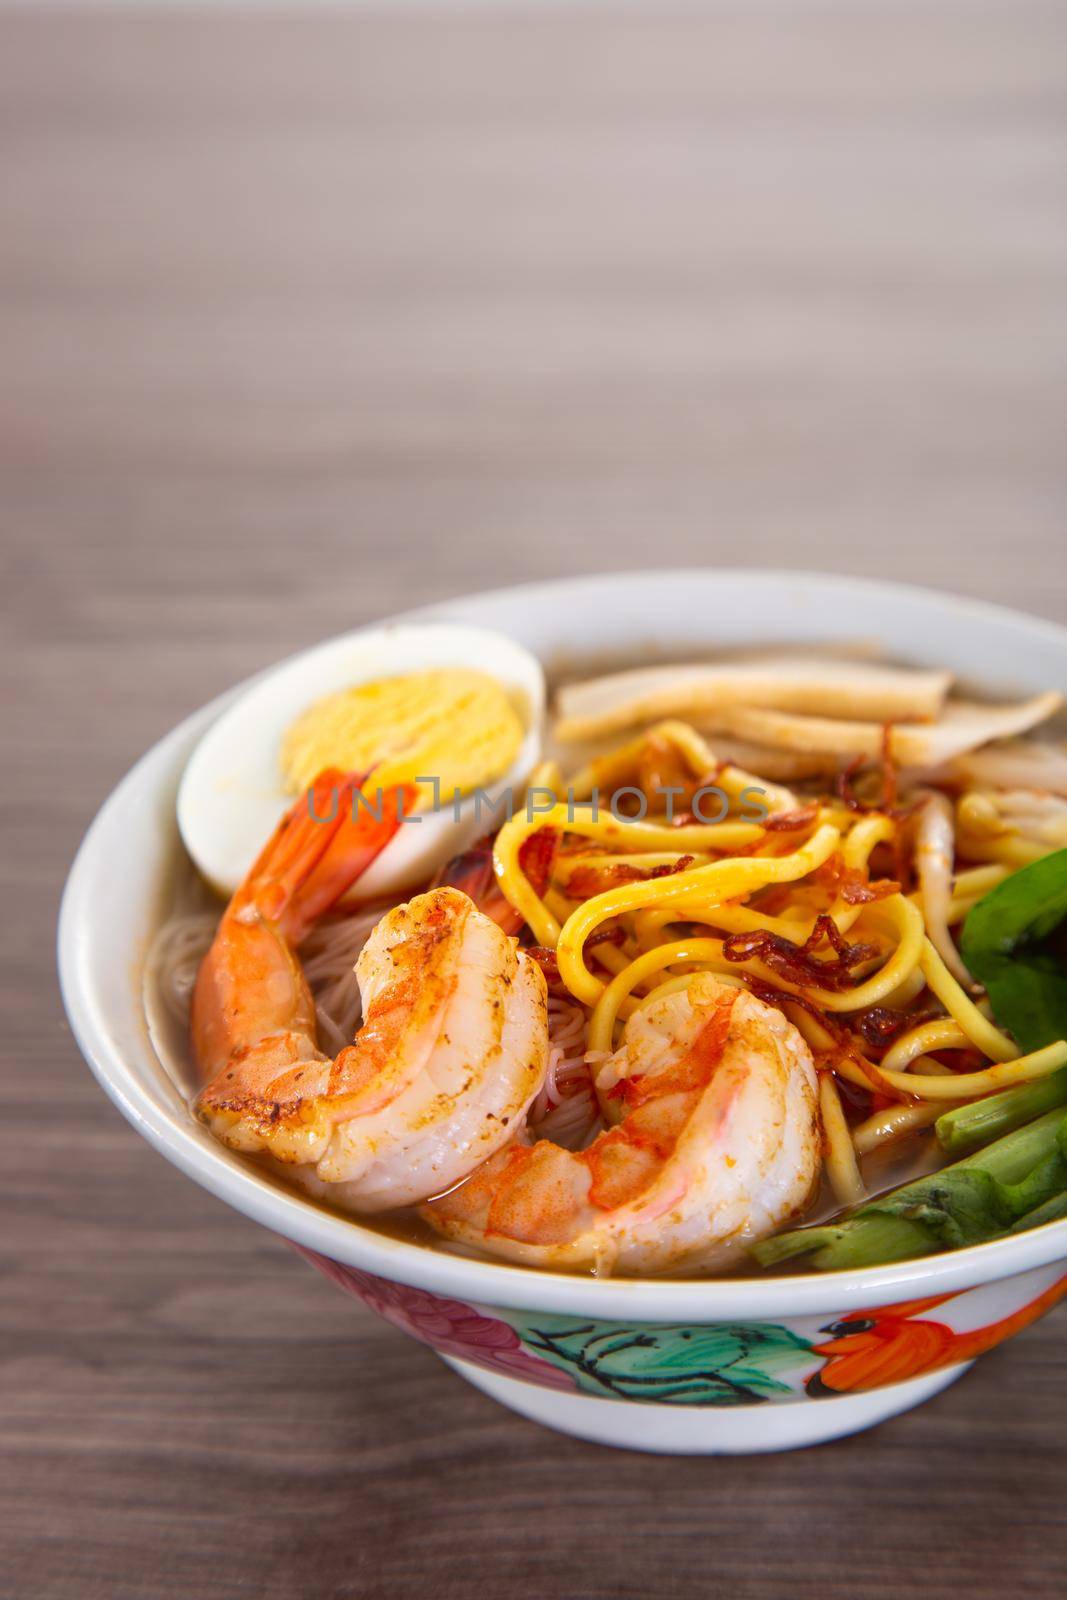 Spicy Prawn Noodle. A delicacy made popular by the Chinese in Malaysia